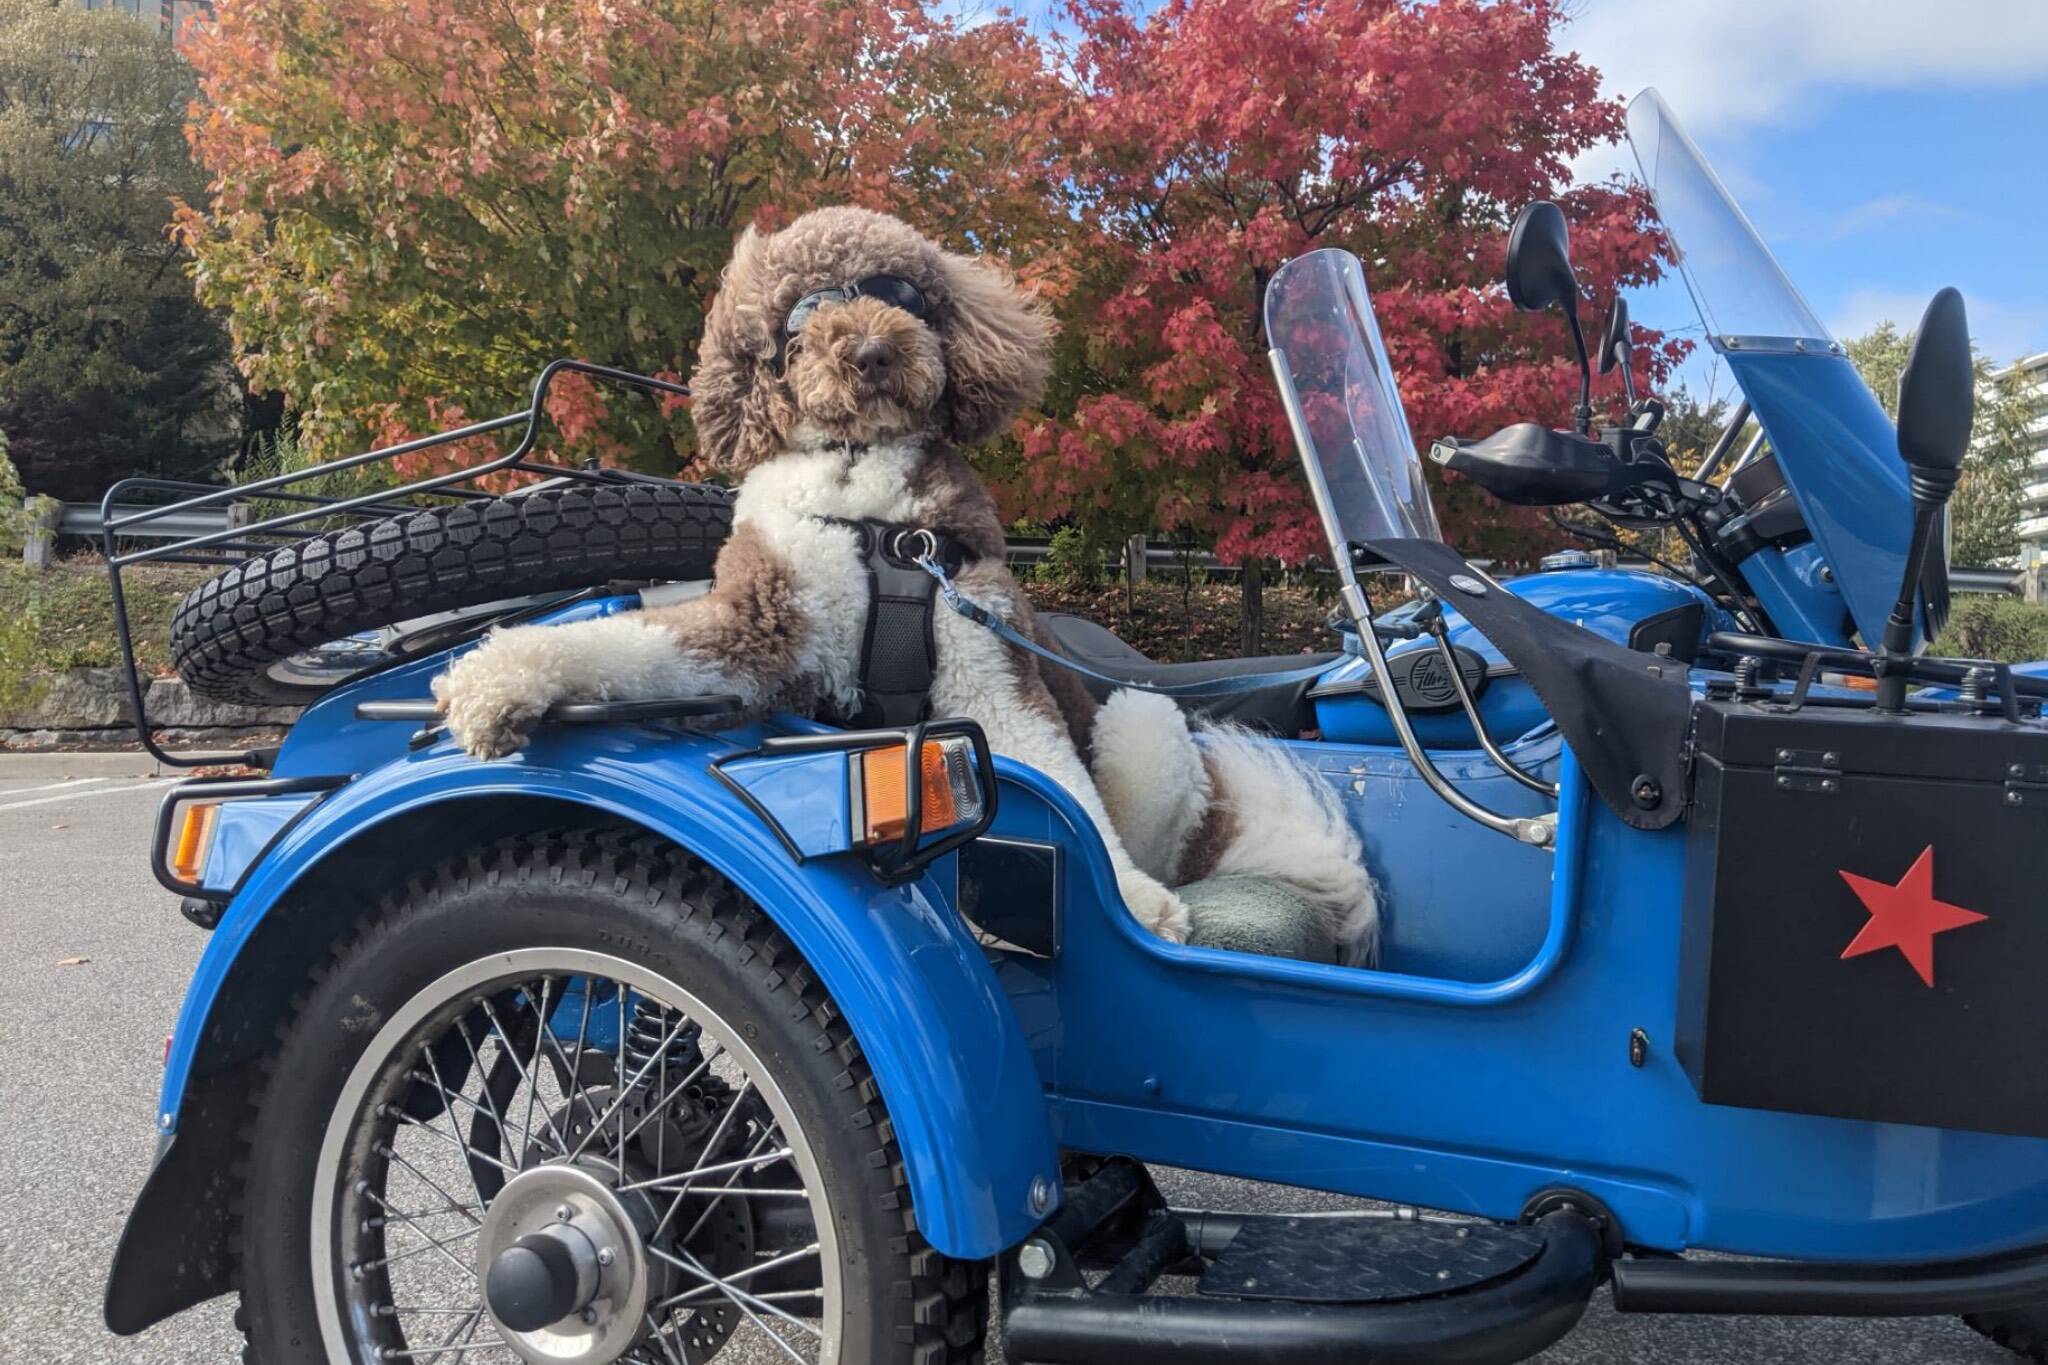 Even Doug Ford loves this goggle-wearing dog who rides in a Toronto sidecar